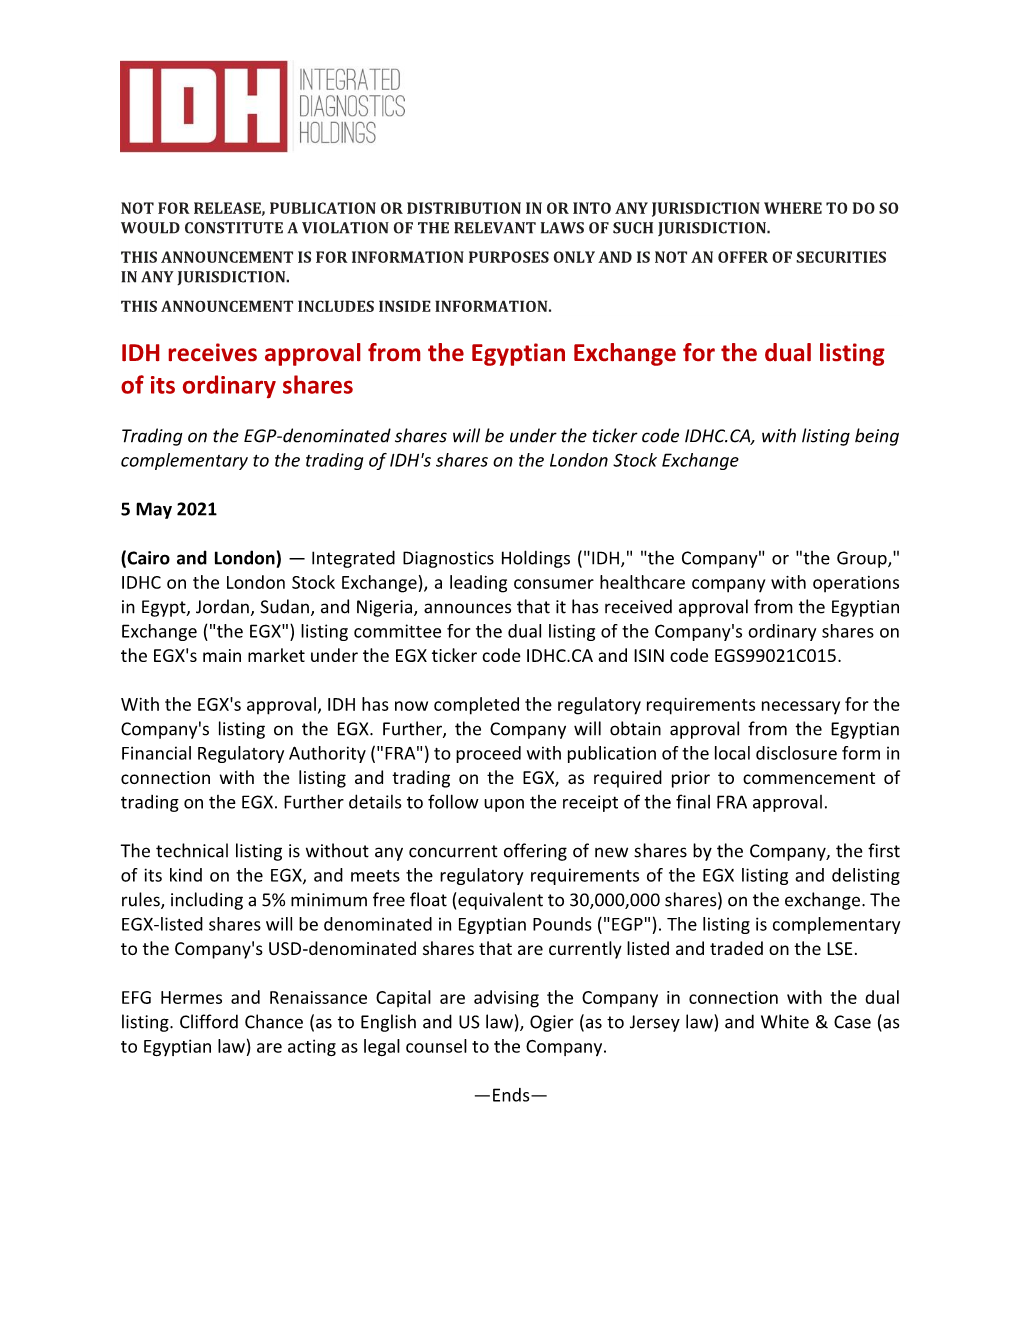 IDH Receives Approval from the Egyptian Exchange for the Dual Listing of Its Ordinary Shares